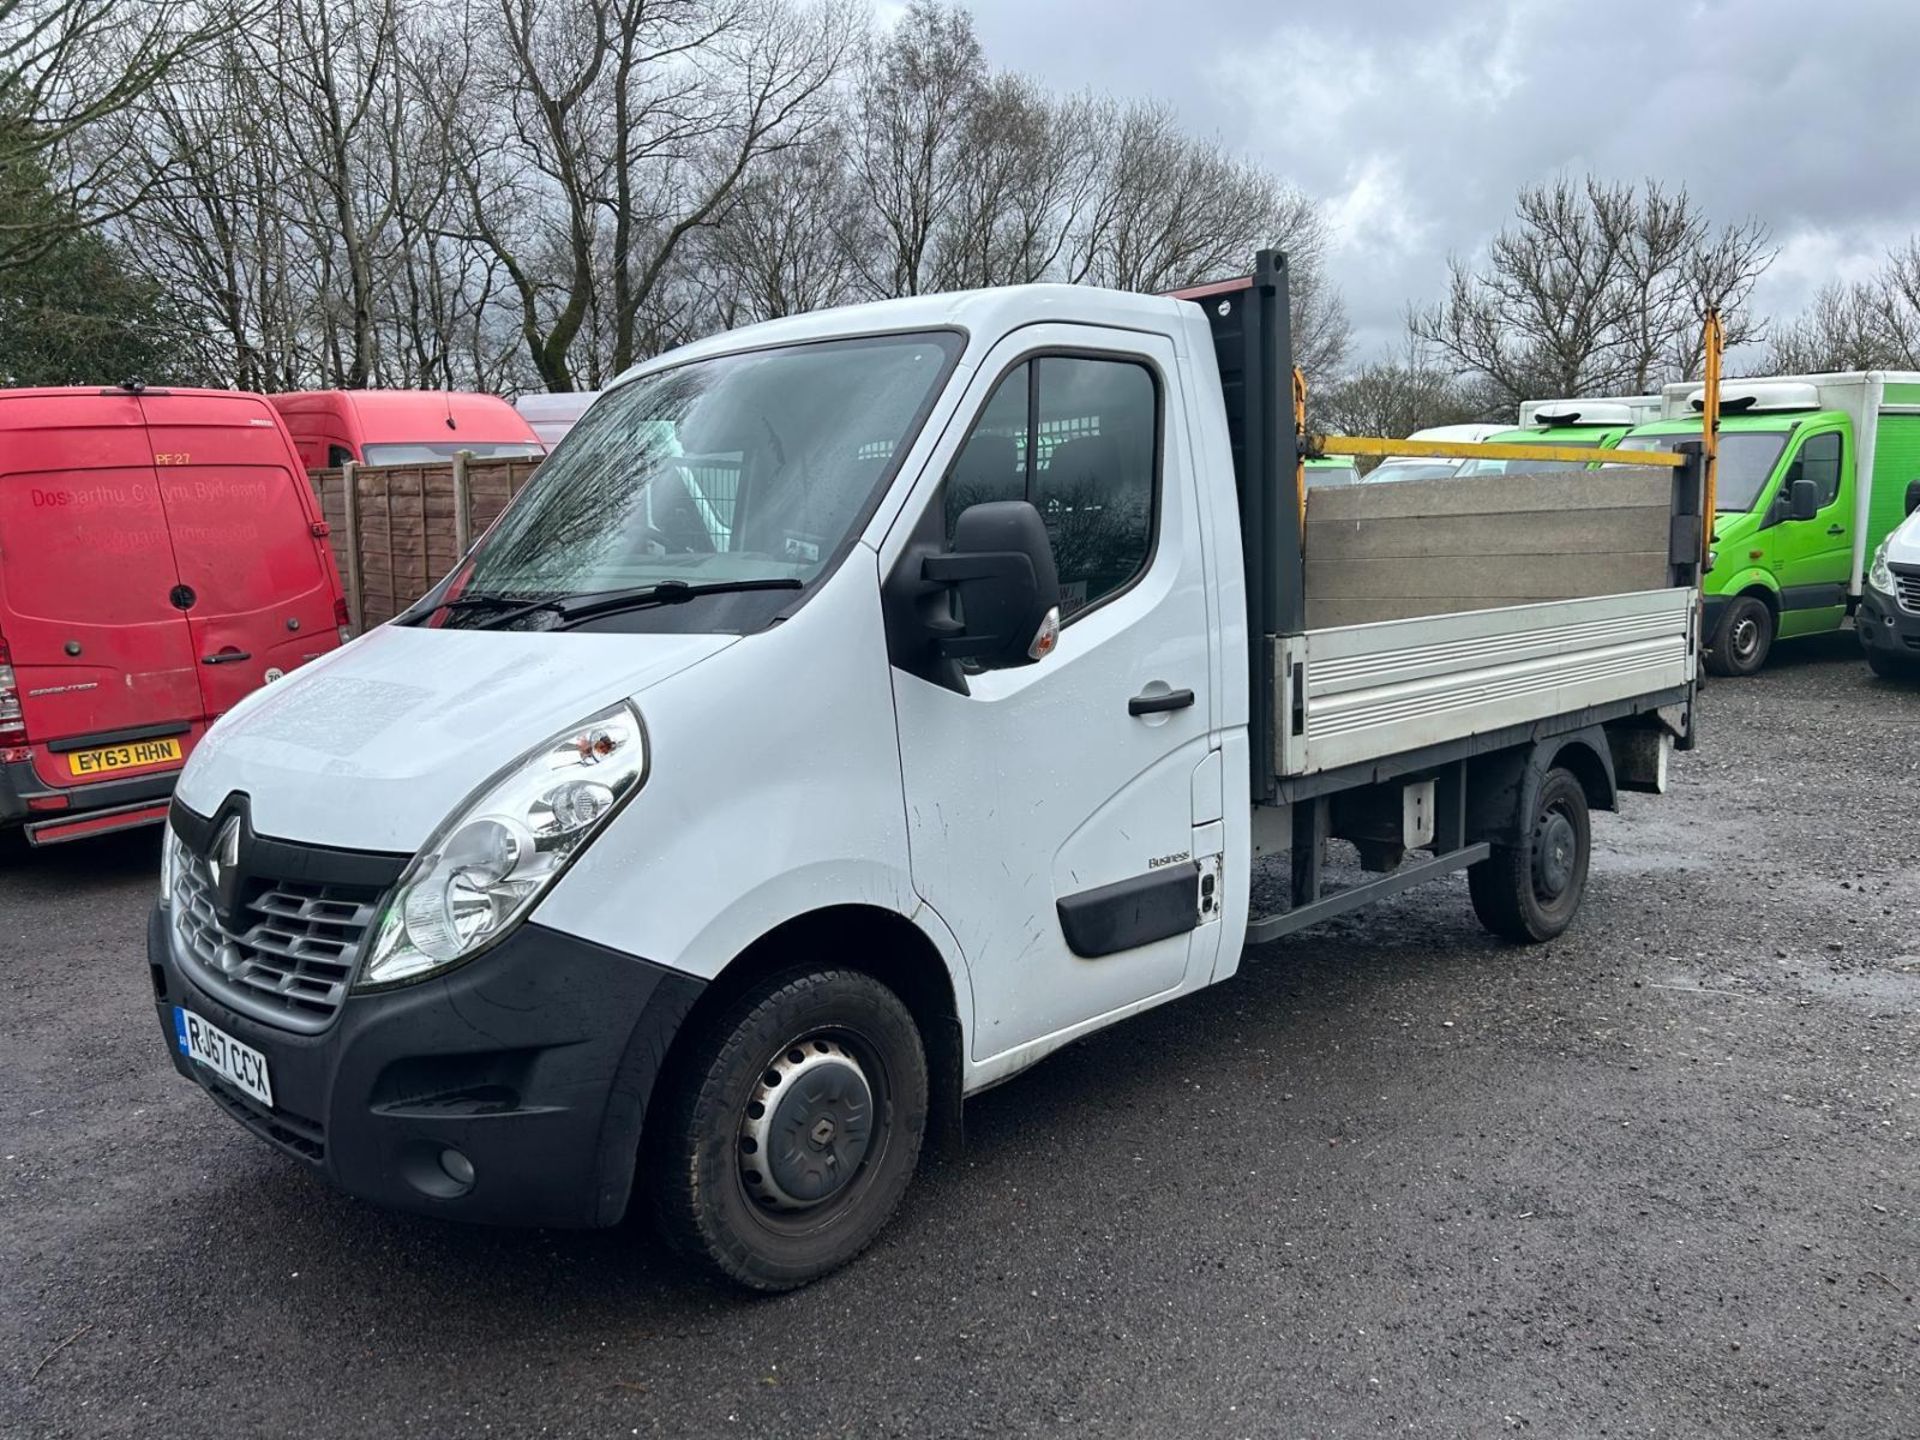 2018 RENAULT MASTER ML35 BUSINESS DCI 125 L2H1 MWB ALLOY DROPSIDE WITH TAIL LIFT - Image 2 of 13